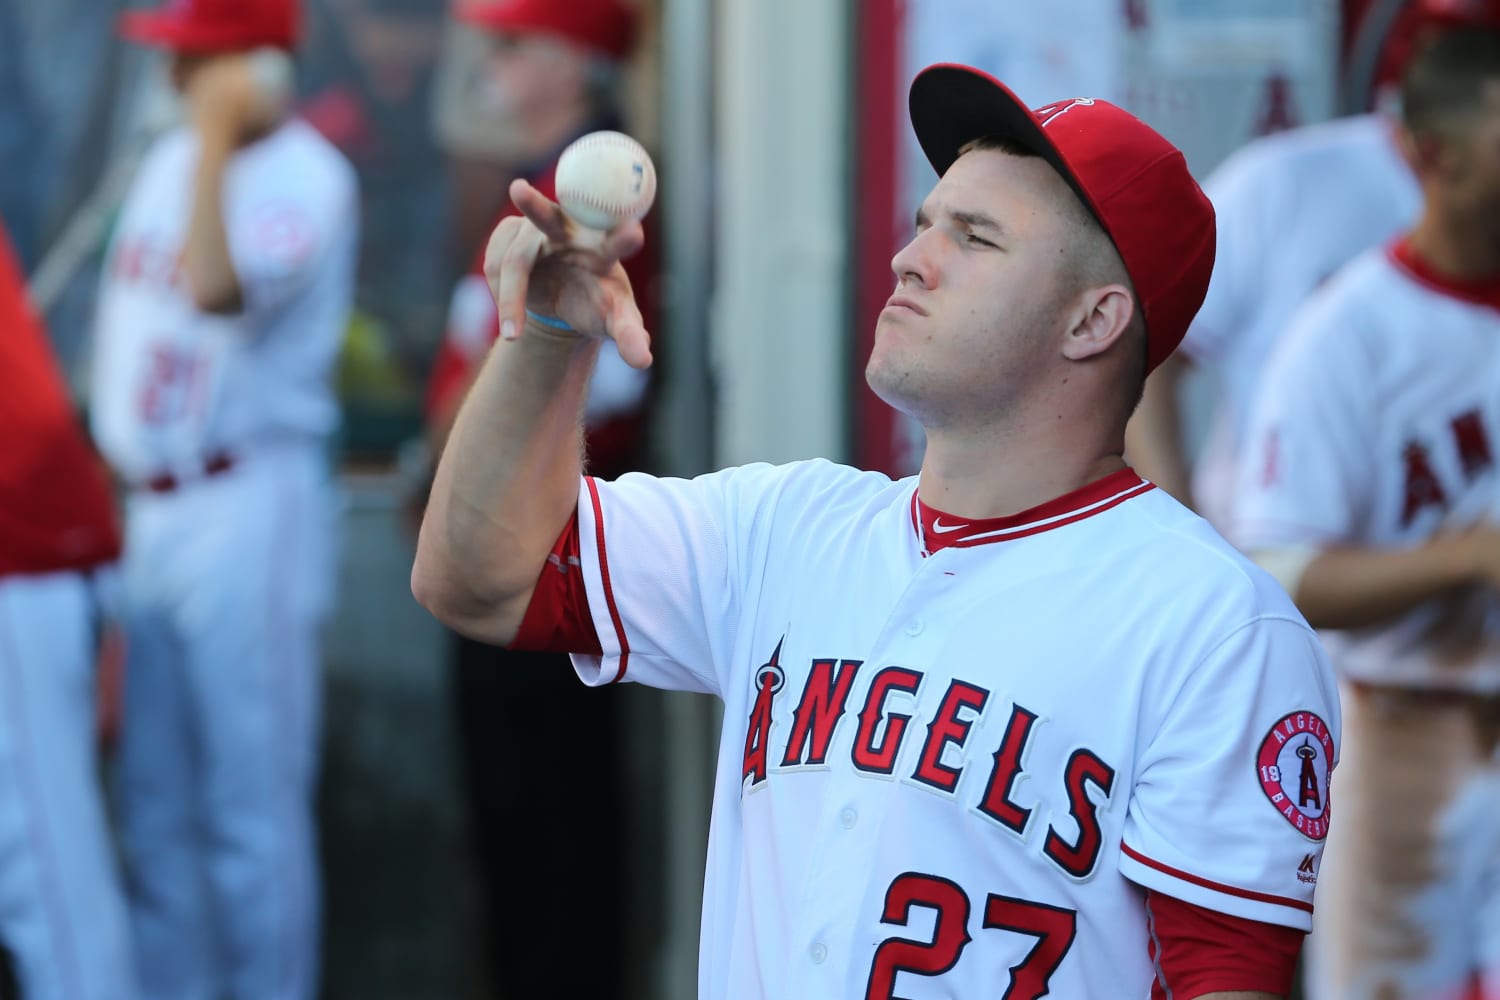 Mike Trout says he's fine after car accident